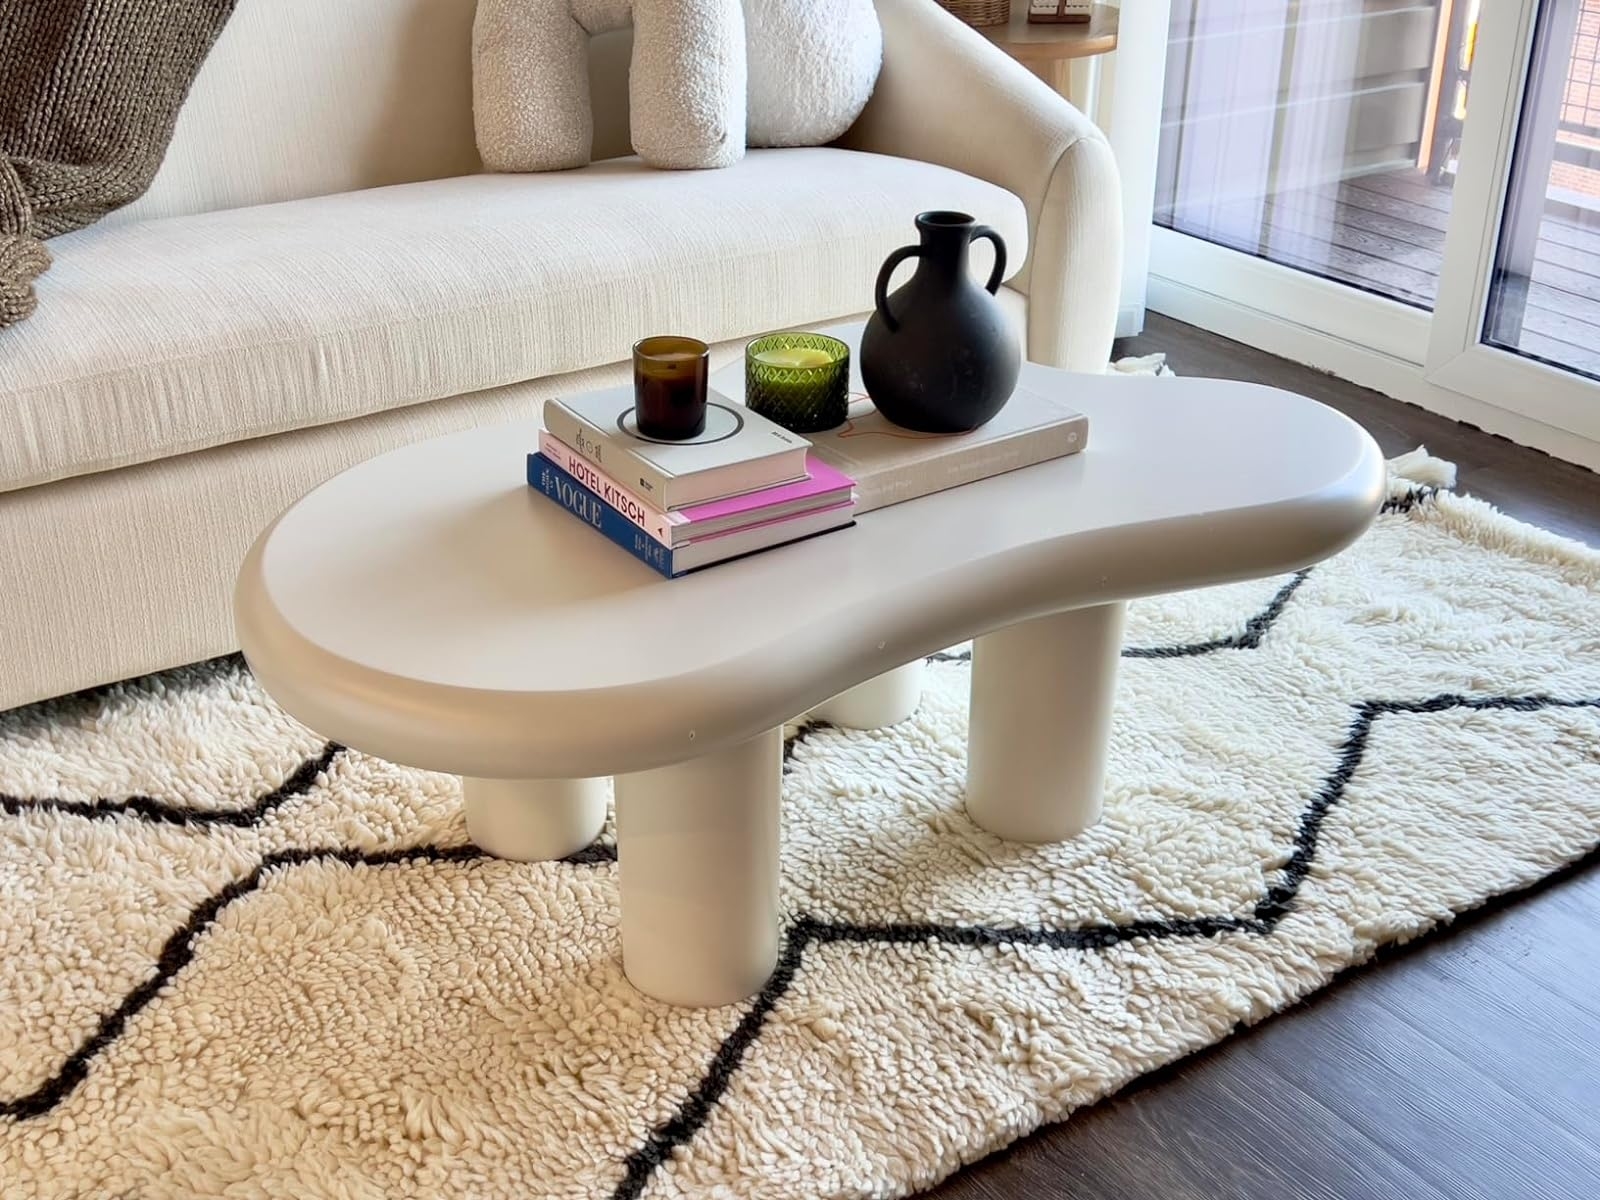 Modern living room with a stylish curved coffee table adorned with books and decorative items